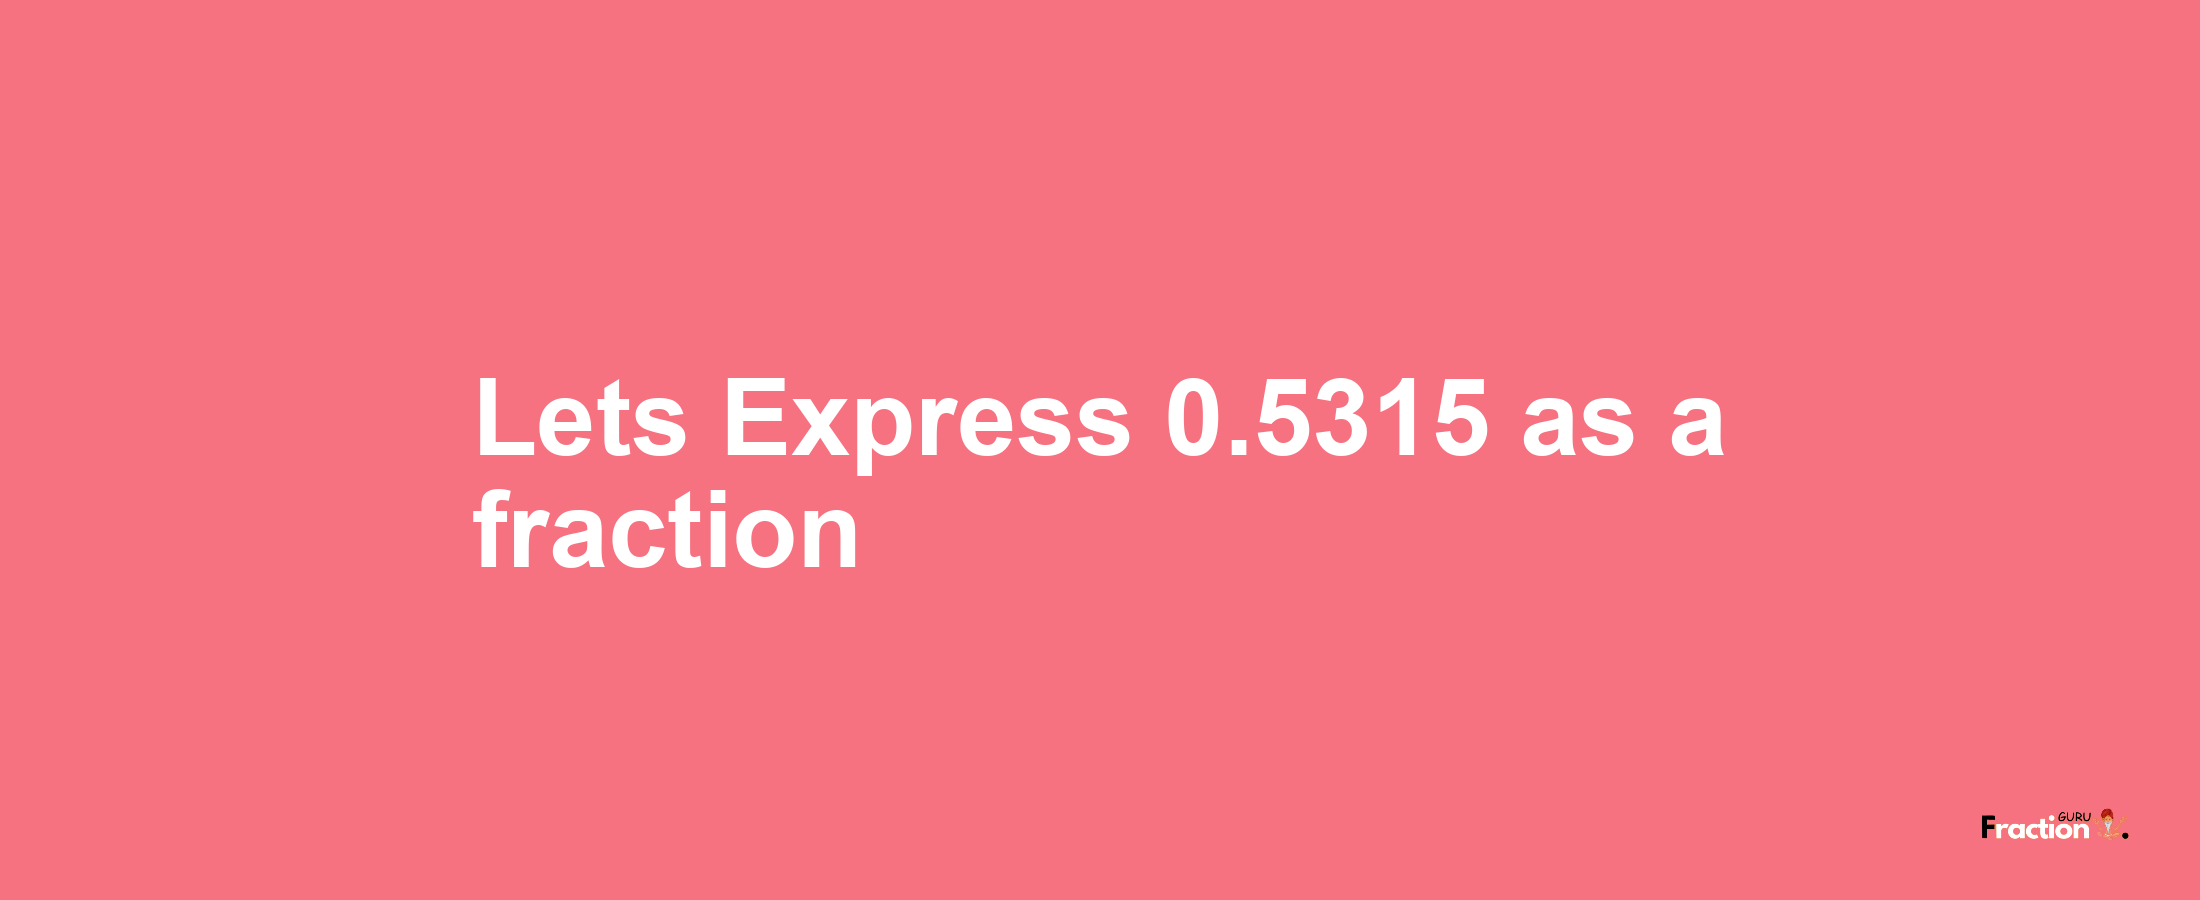 Lets Express 0.5315 as afraction